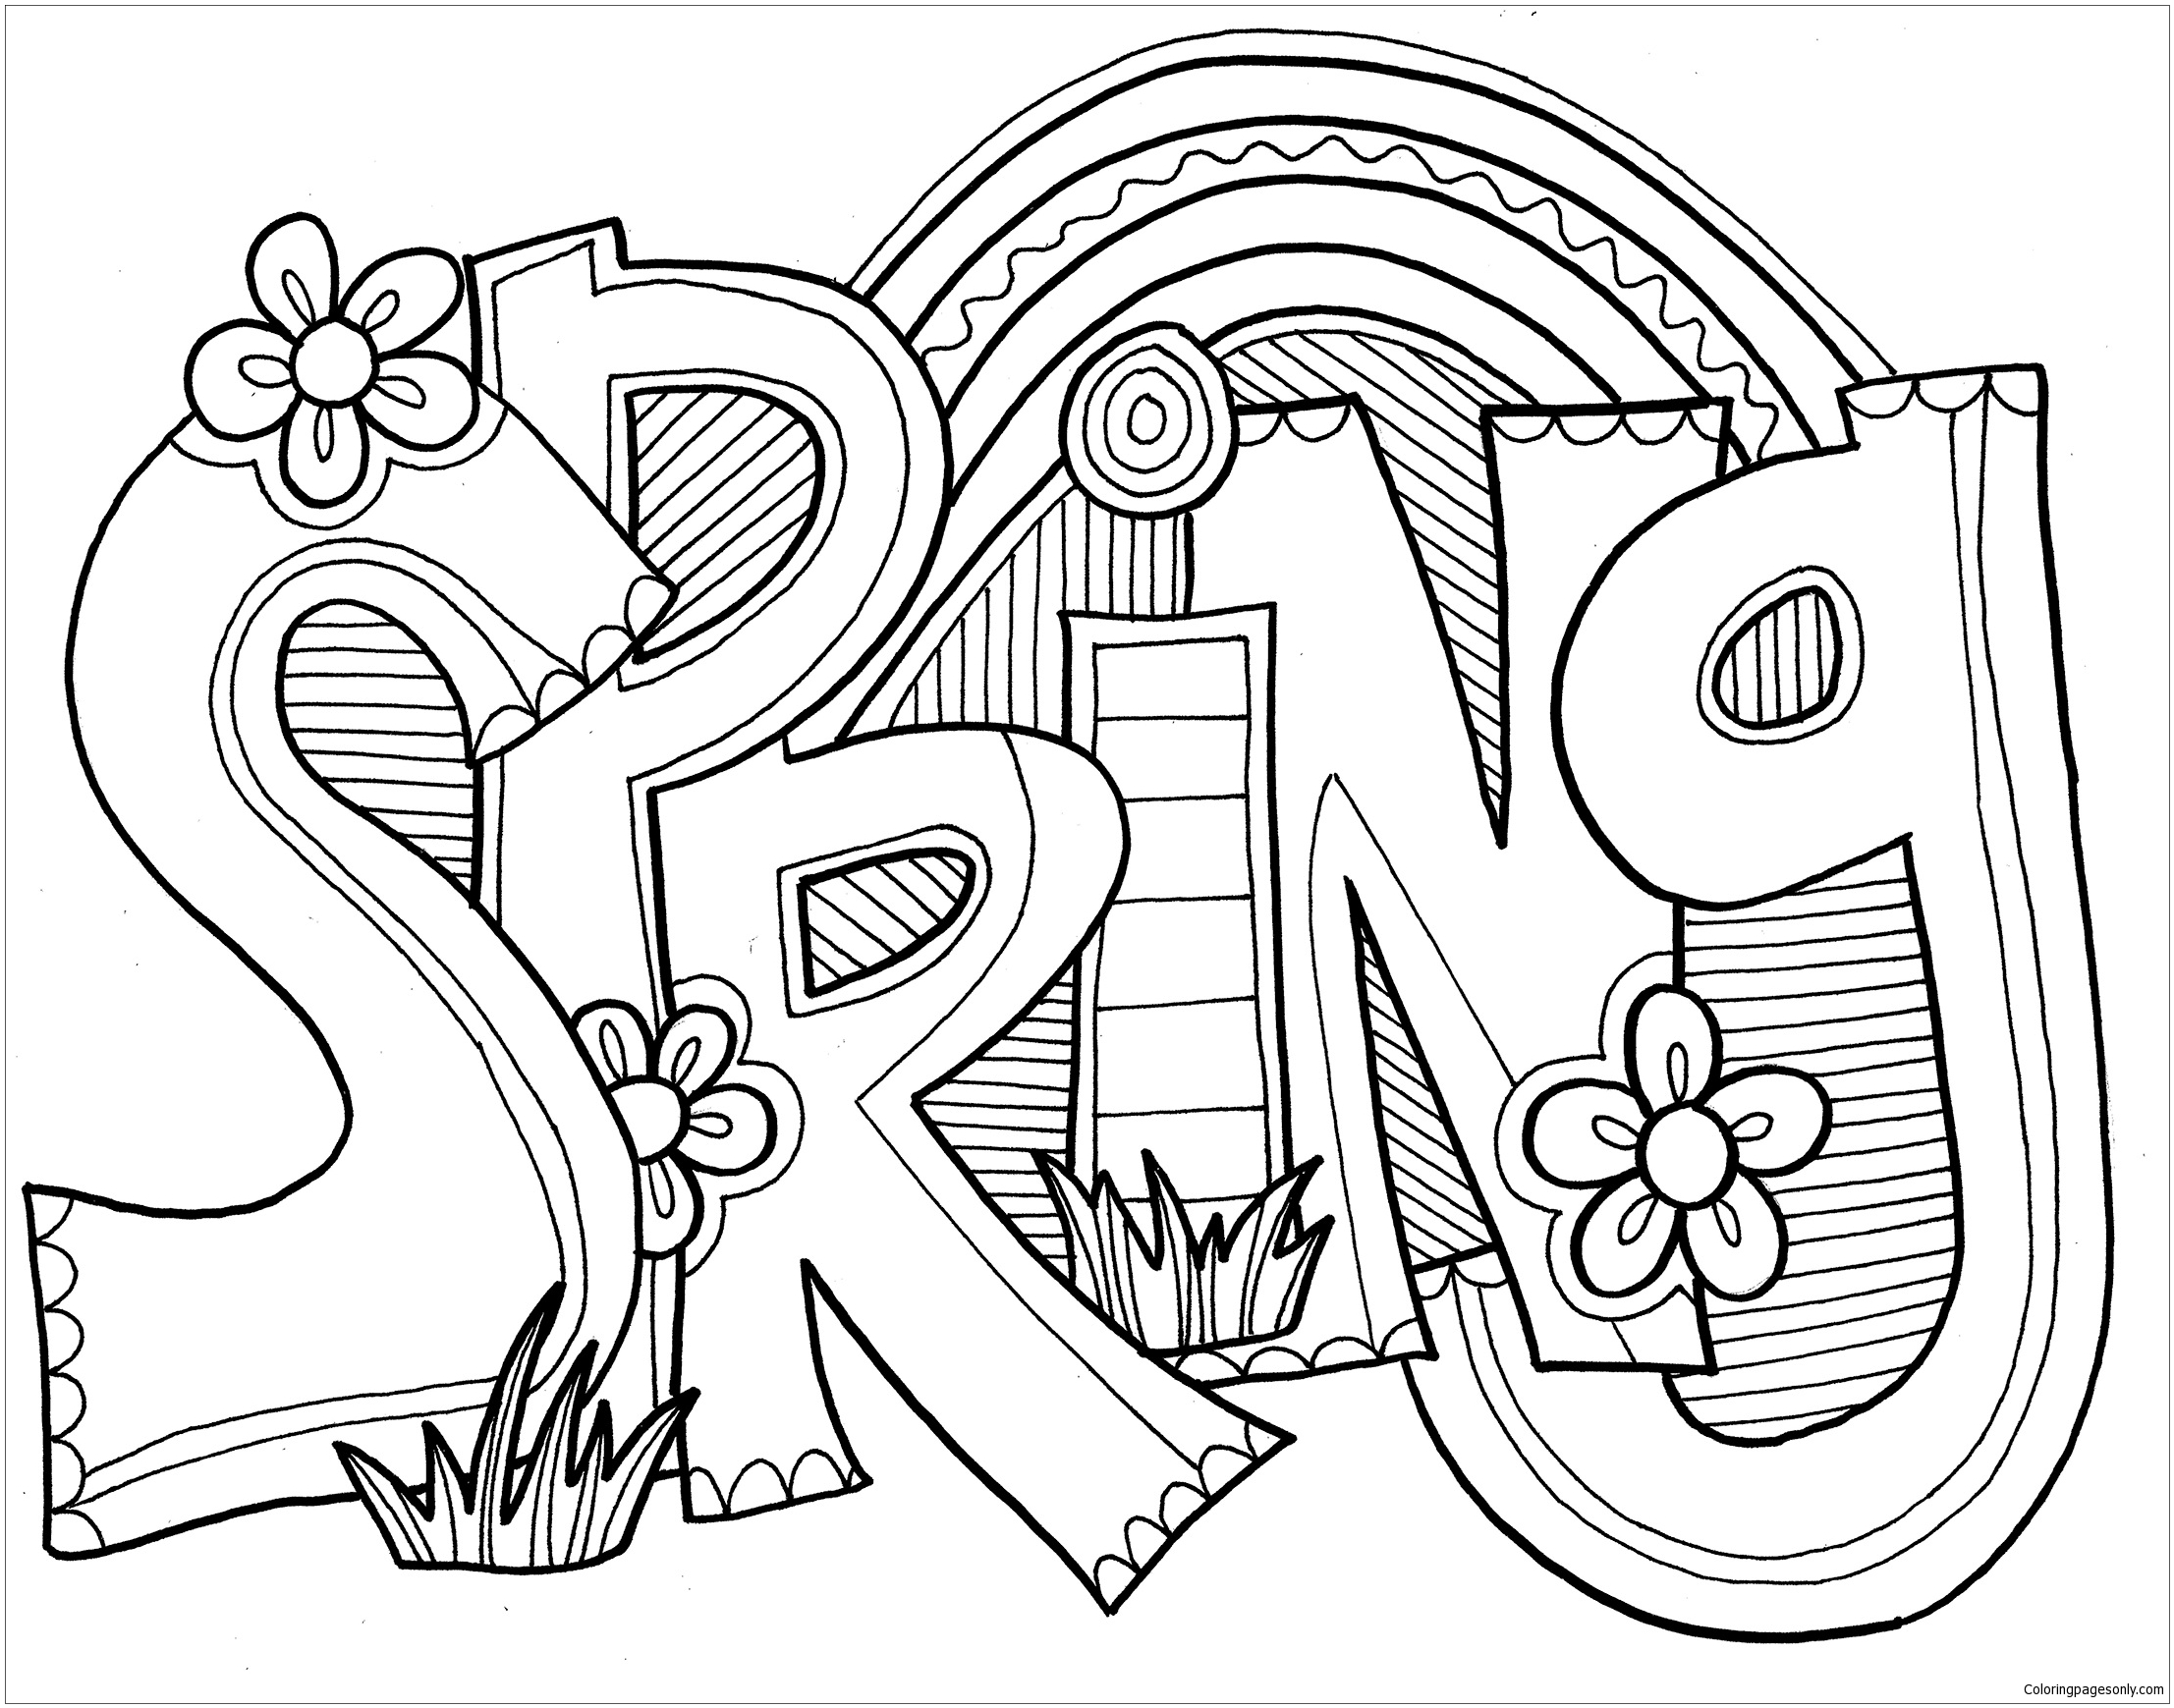 Spring Word Coloring Page Free Coloring Pages Online